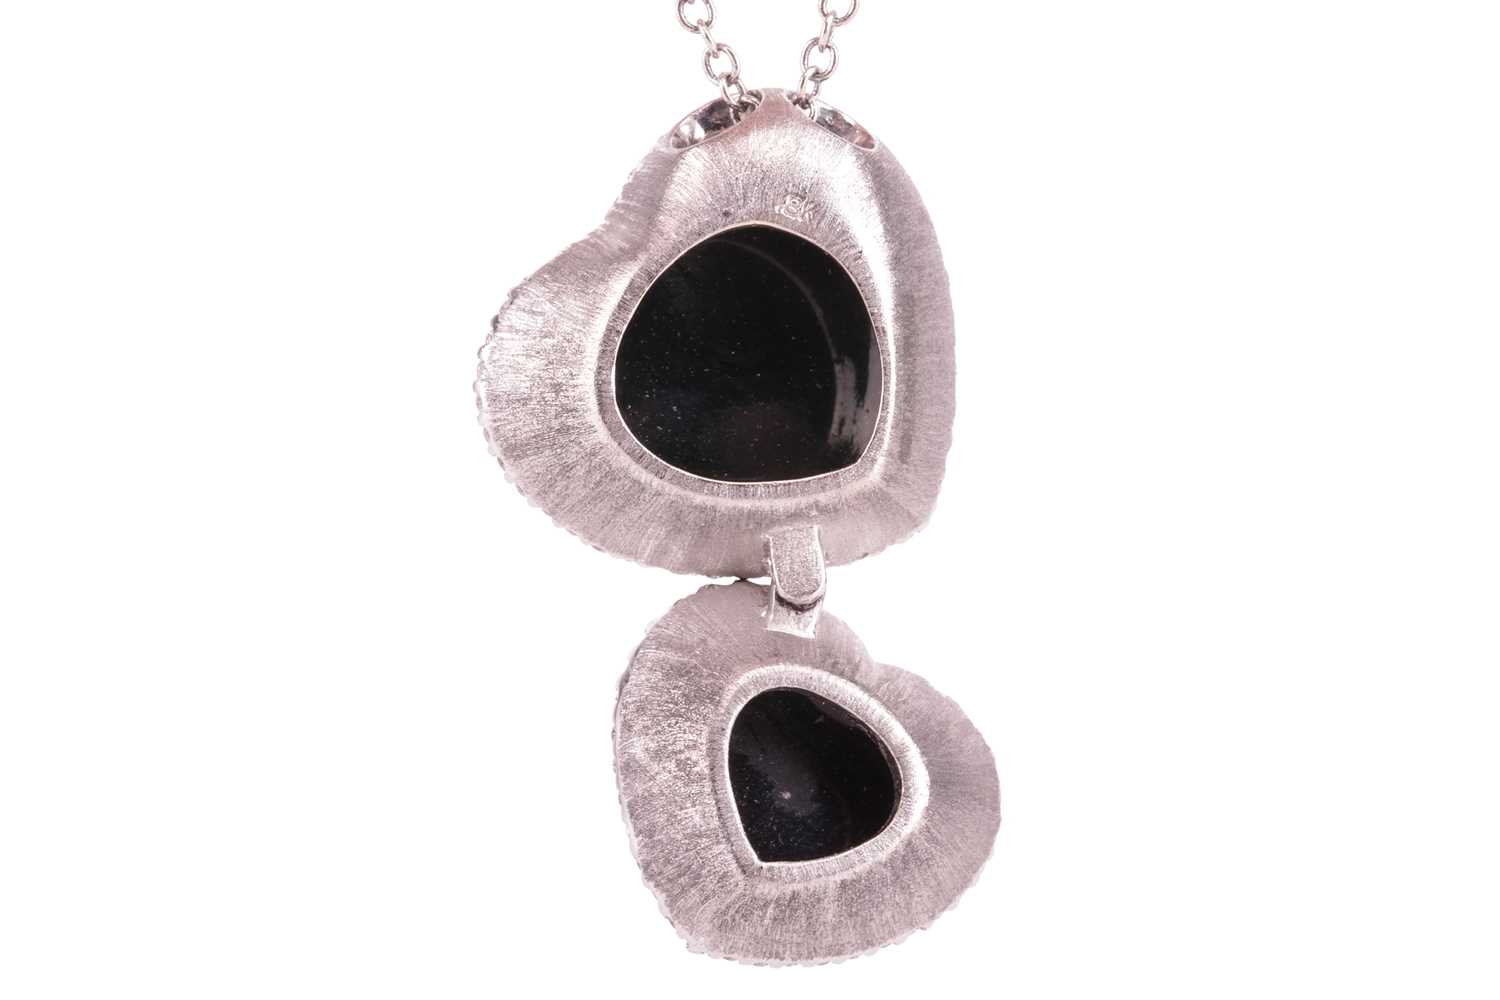 A Whitby jet and diamond double heart pendant on chain, featuring two heart-shaped jet cabochons, fr - Image 2 of 3